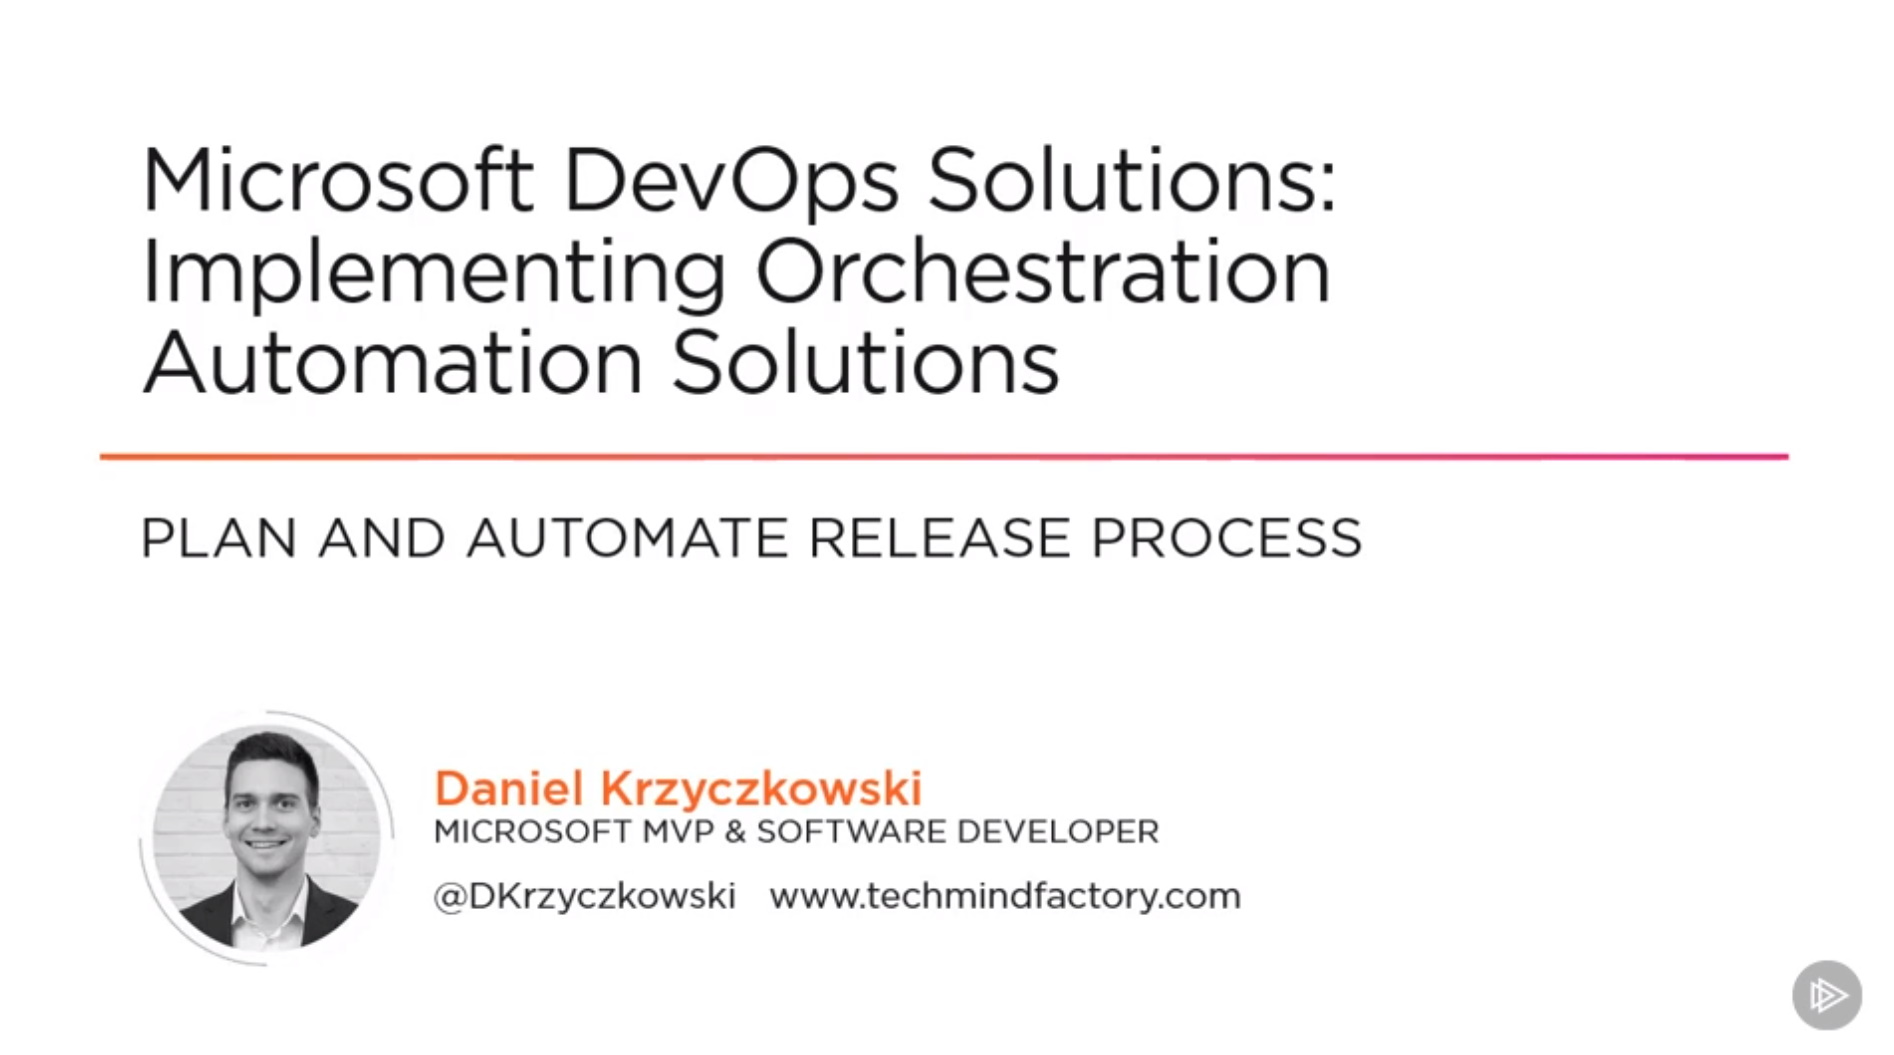 Microsoft DevOps Solutions: Implementing Orchestration Automation Solutions